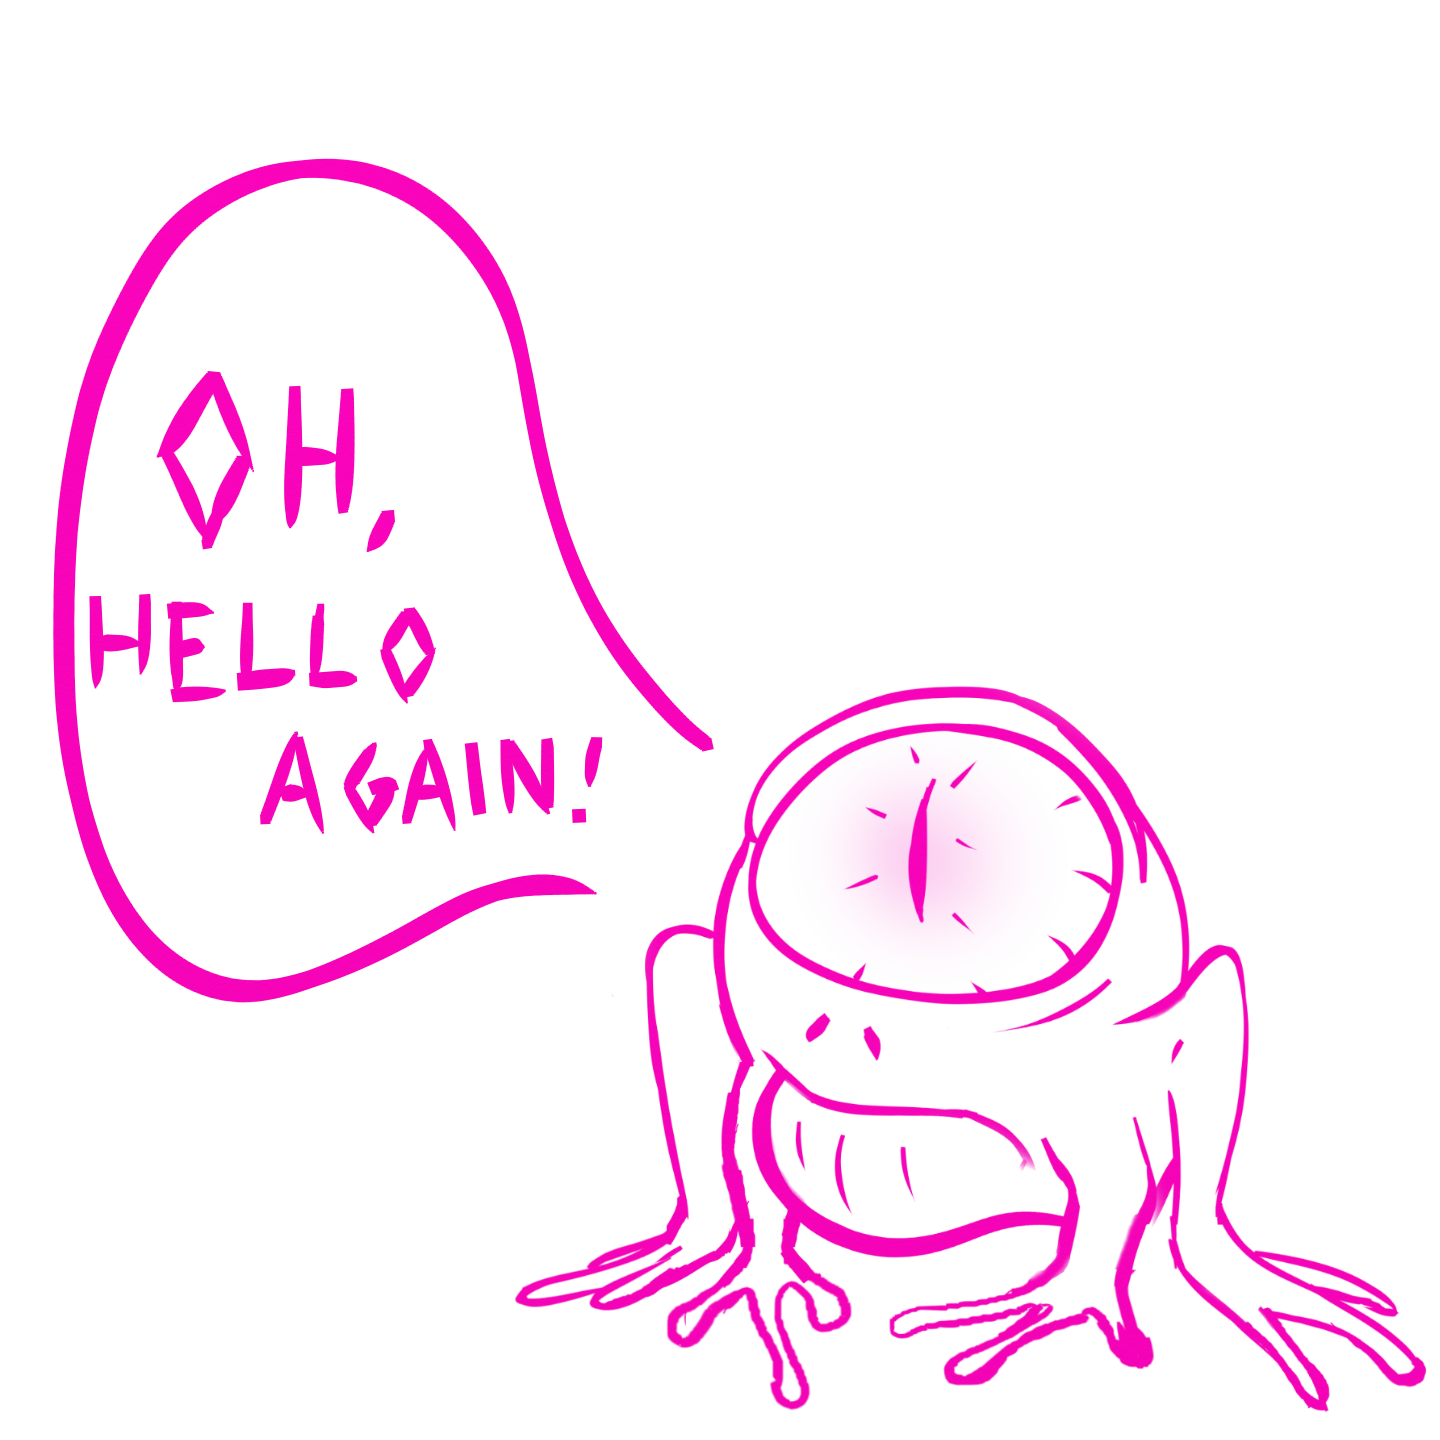 Return of the Void Frog. He is saying Hello again.